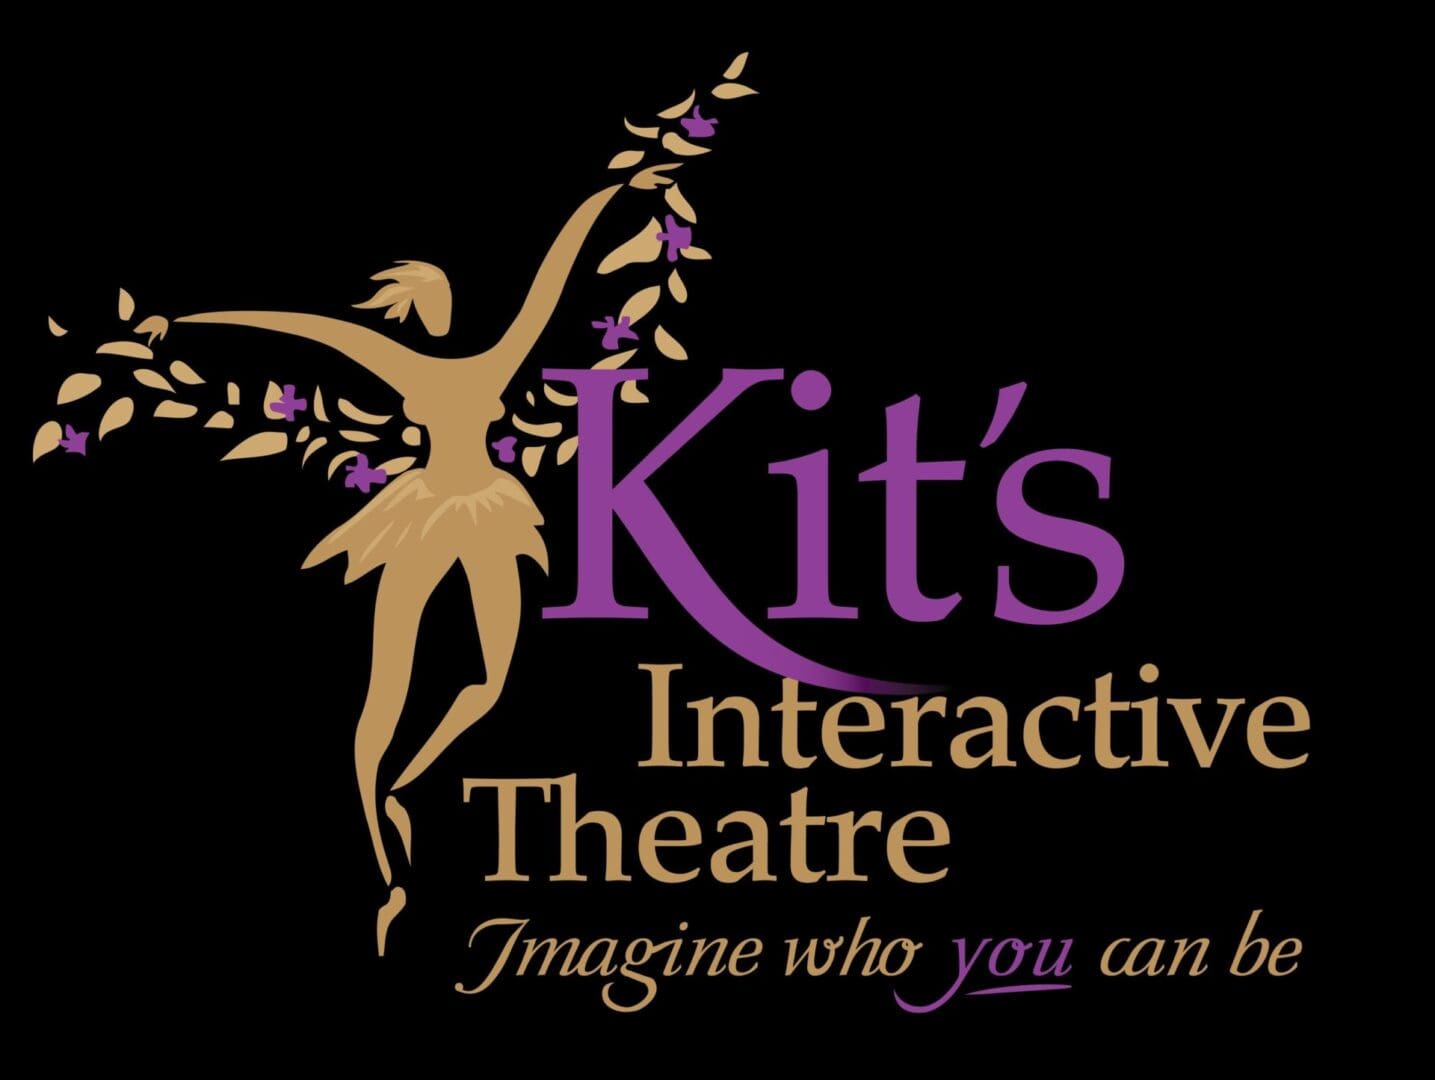 A logo for kit 's interactive theatre.